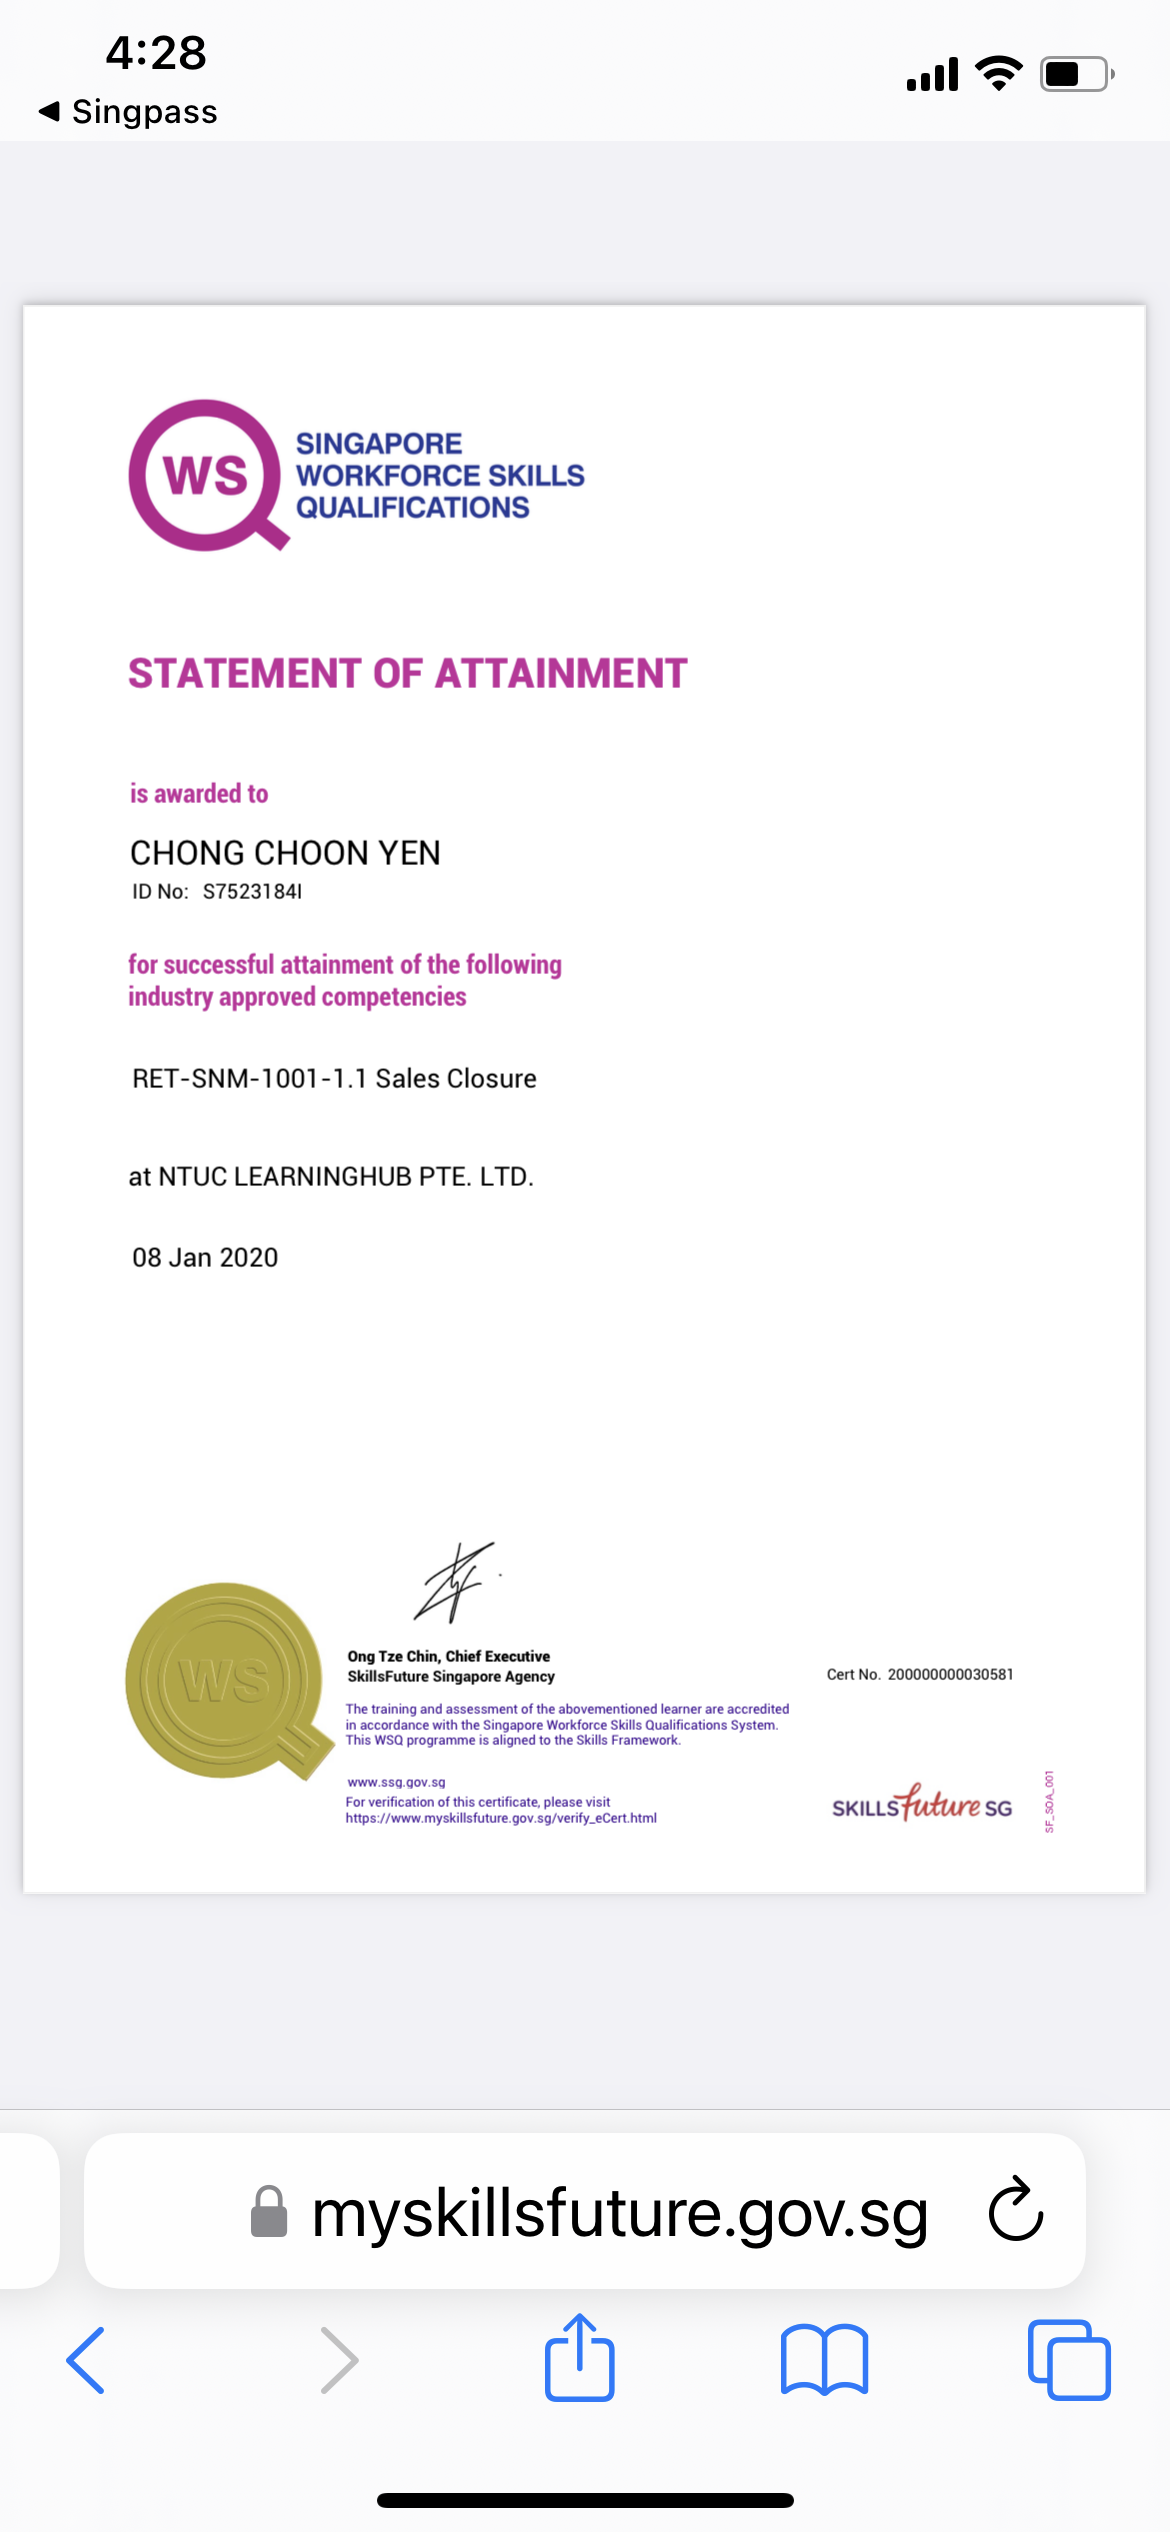 4:28

4 Singpass

al FT @)

SINGAPORE
WORKFORCE SKILLS
QUALIFICATIONS

STATEMENT OF ATTAINMENT

is awarded to

CHONG CHOON YEN

ID No: $75231841

for successful attainment of the following
industry approved competencies

RET-SNM-1001-1.1 Sales Closure

at NTUC LEARNINGHUB PTE. LTD.

08 Jan 2020

#

Ong Tze Chin, Chief Executive
SkillsFuture Singapore Agency Cert No. 2000000003058)
The ranng and assessment of the abovementioned learner are accredried

in accordance with the Singapare Workforce Skills Quakfications System
This WSQ programme is aligned 10 the Skills Framework

 

wow 333. 00v 39
For verification of this certificate. please vist
Pps woe myskilafuture gov 39/ very. Cort amd SKILLS SG

& myskillsfuture.gov.sg C
< Mh Mm